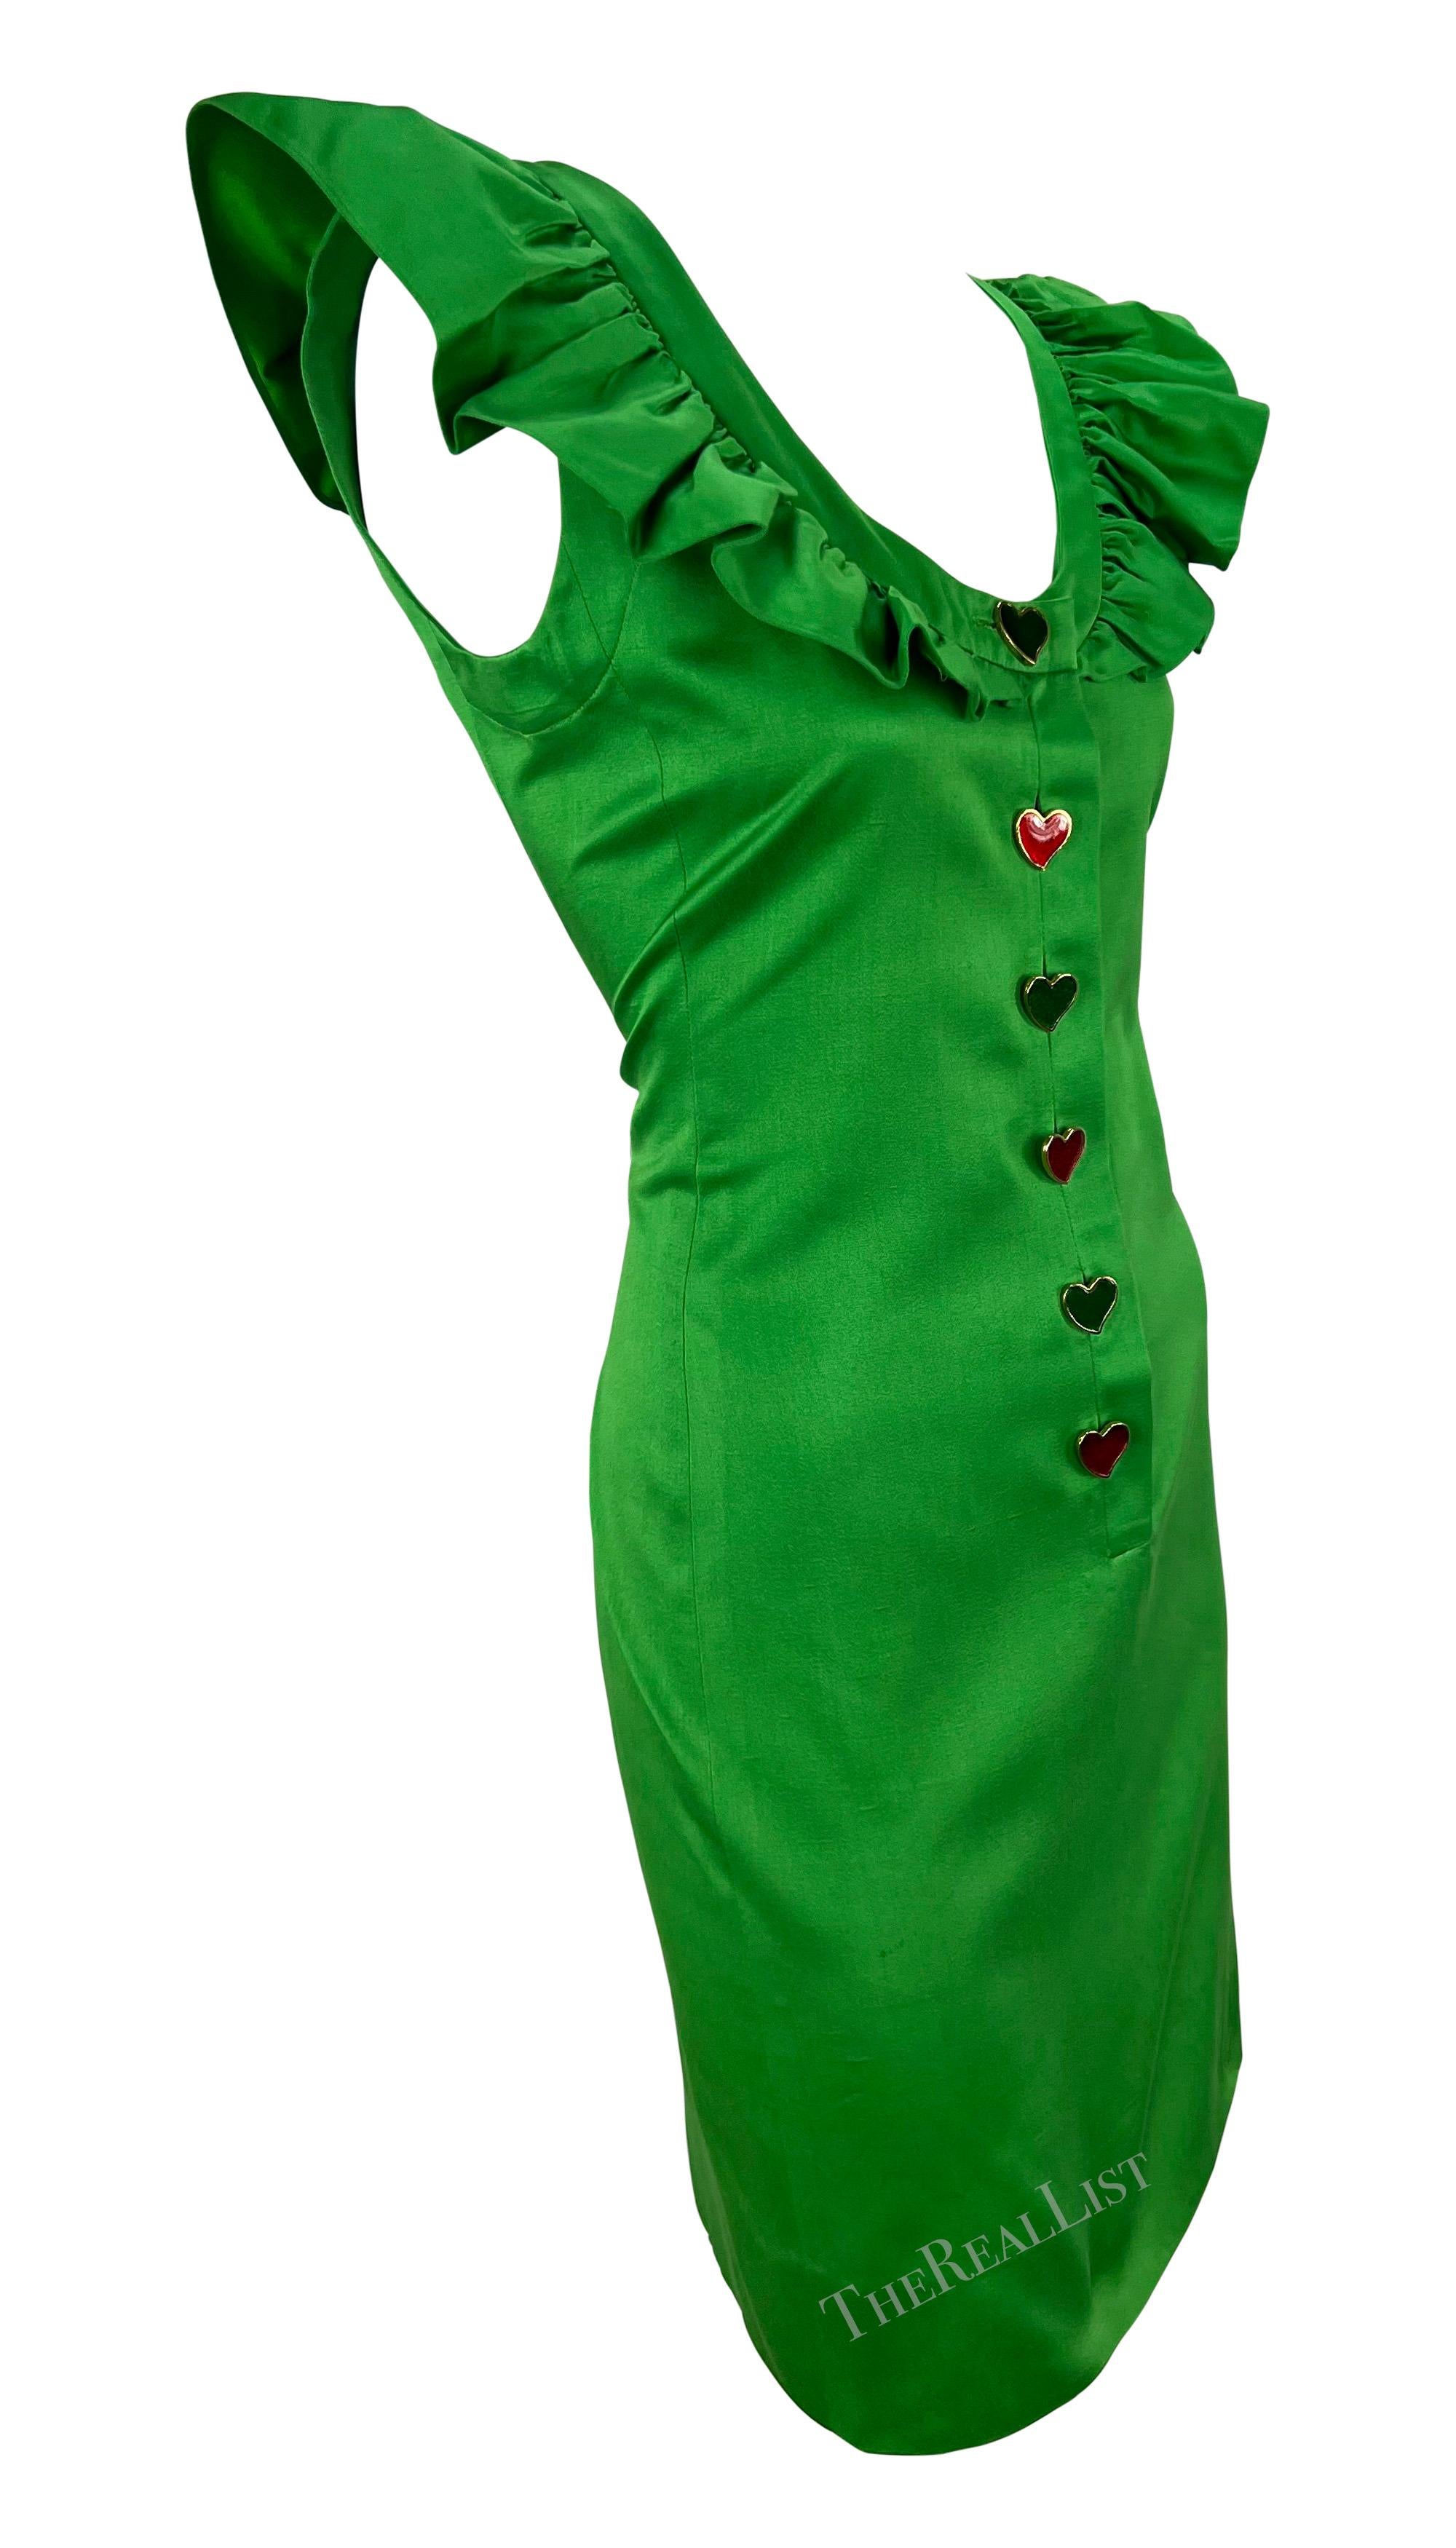 S/S 1992 Yves Saint Laurent Runway Ad Bright Green Ruffle Heart Button Dress For Sale 5